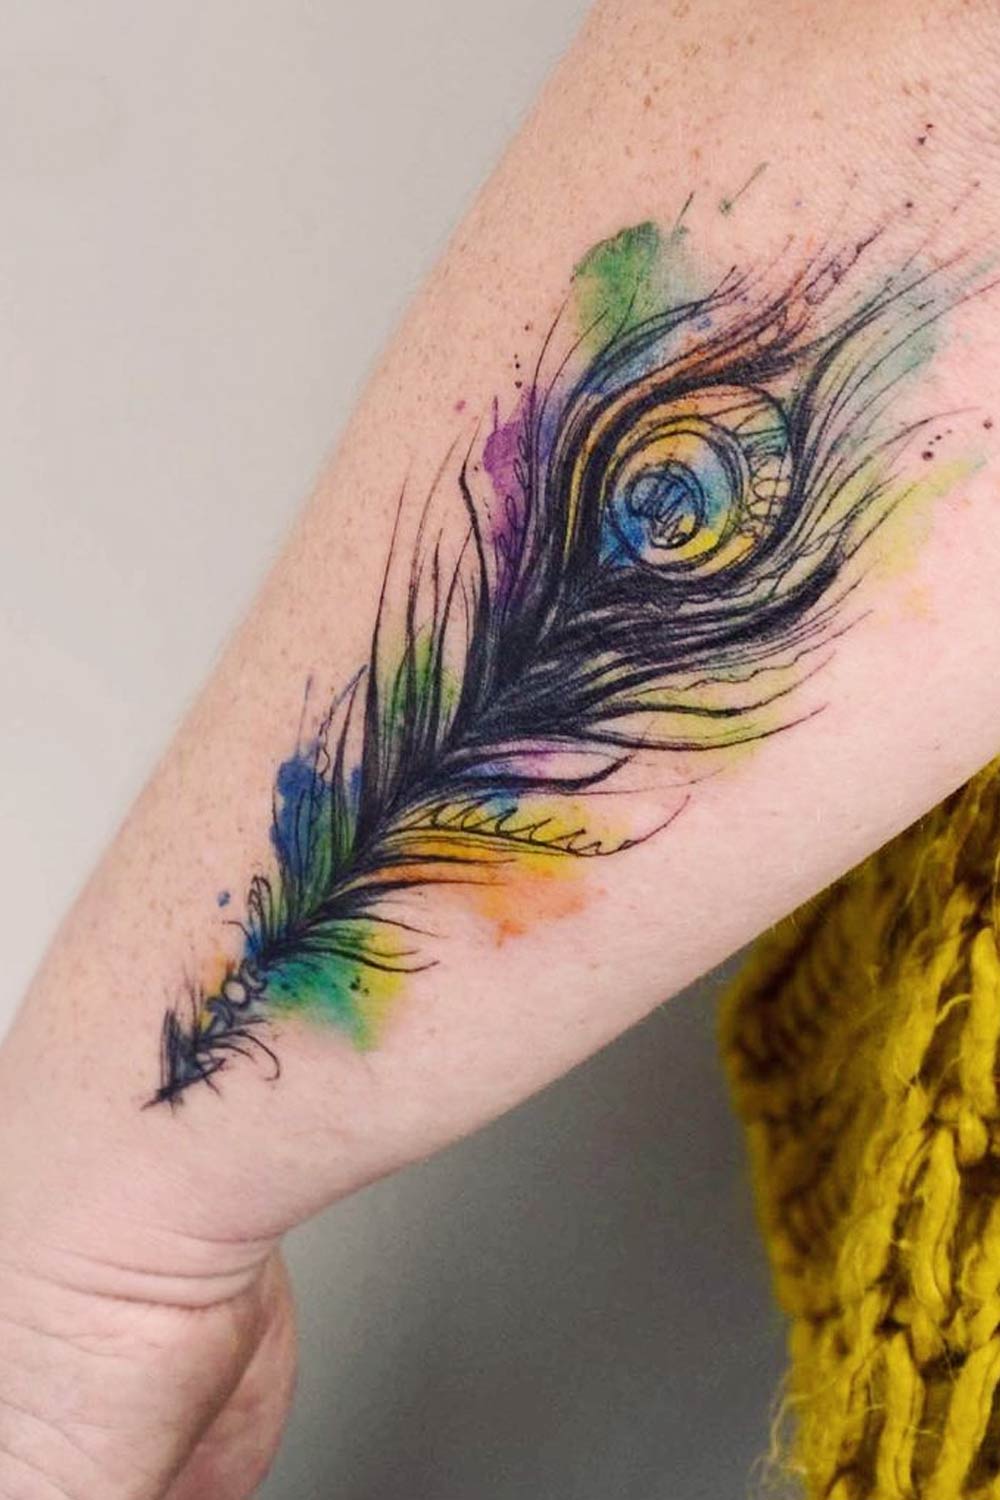 Feather tattoo on the inner forearm.